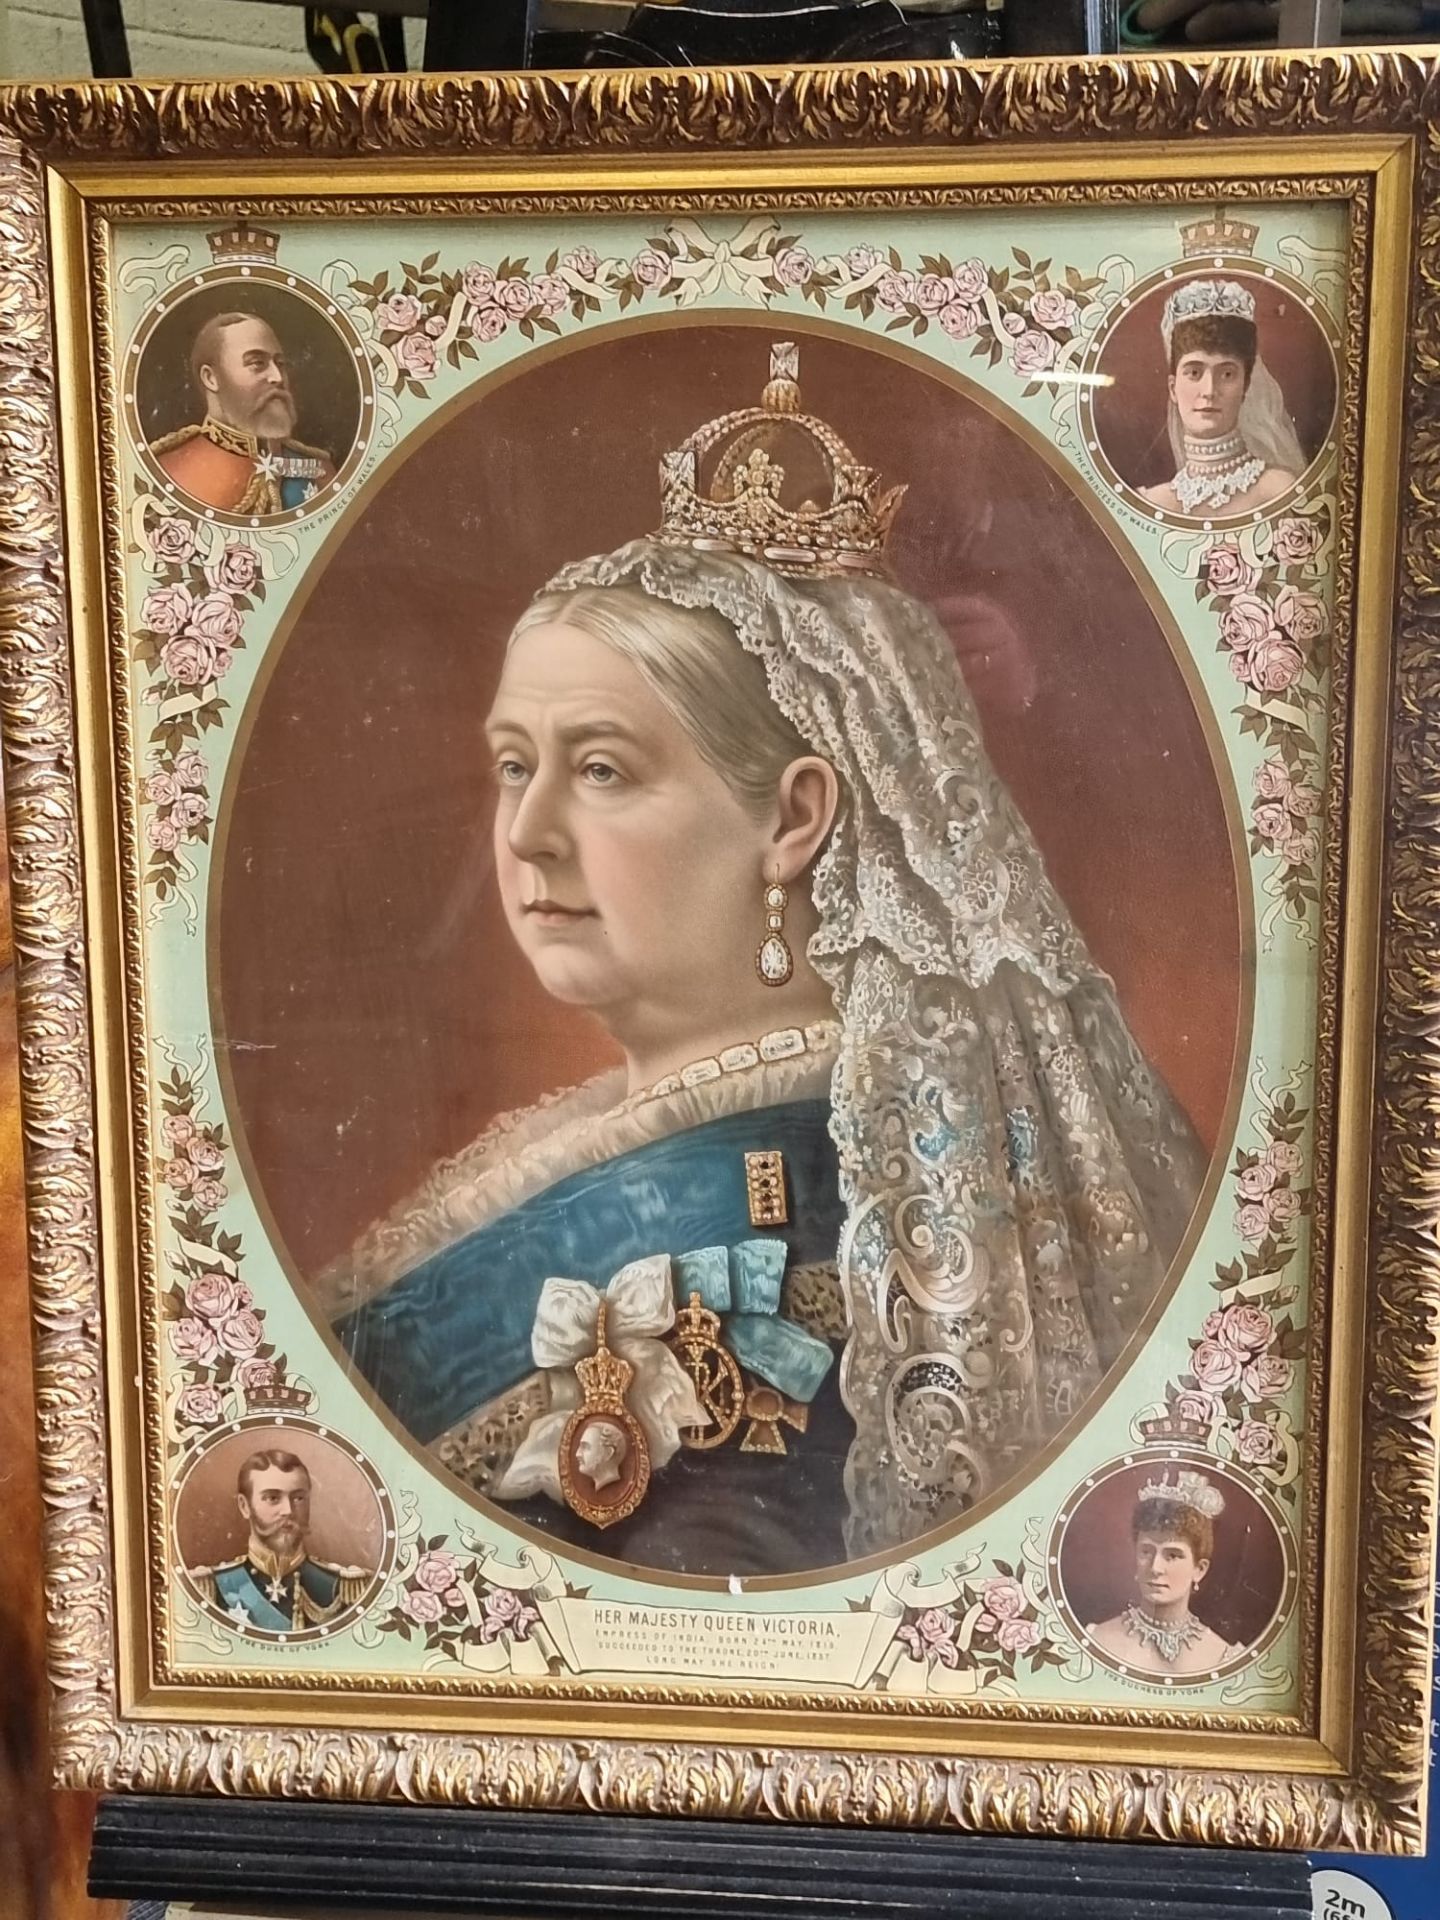 Queen Victoria Framed Print With Inscription Plate Under Her Majesty Queen Victoria Empress Of India